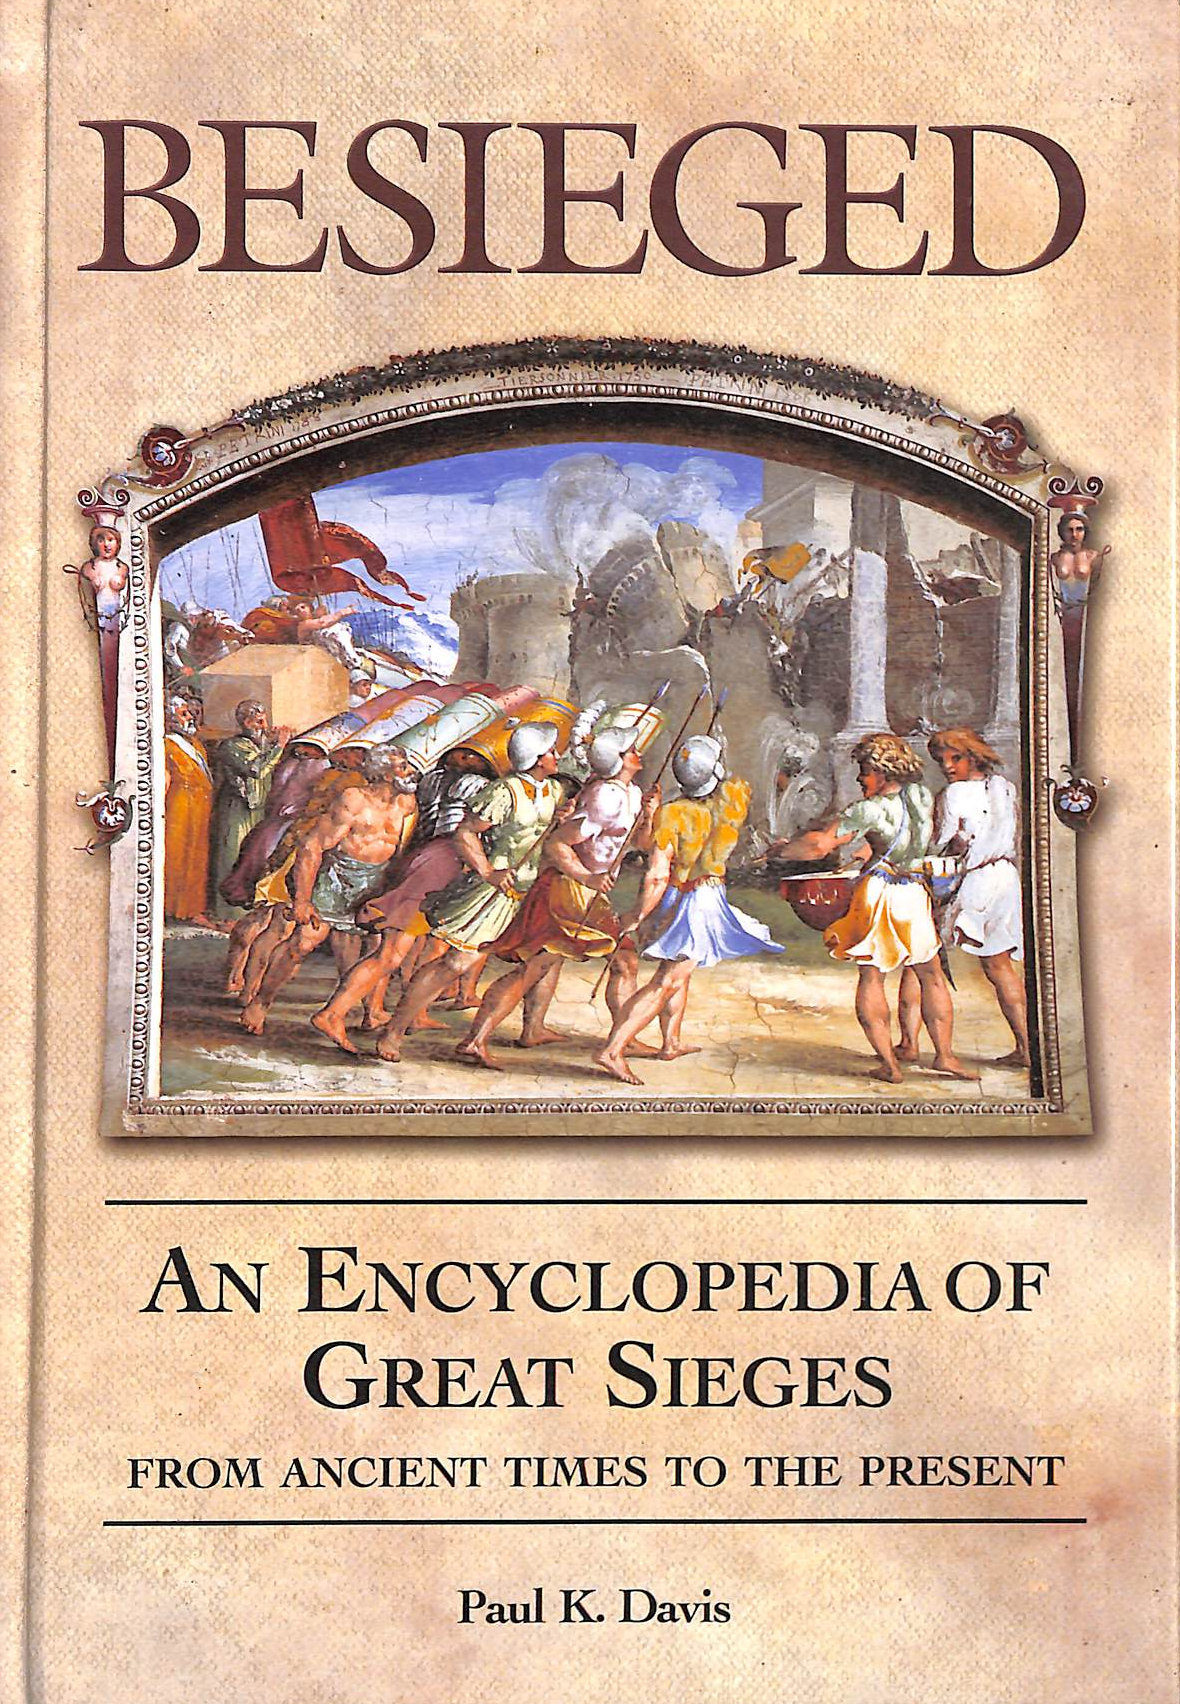 DAVIS, PAUL K. - Besieged: An Encyclopedia of Great Sieges from Ancient Times to the Present